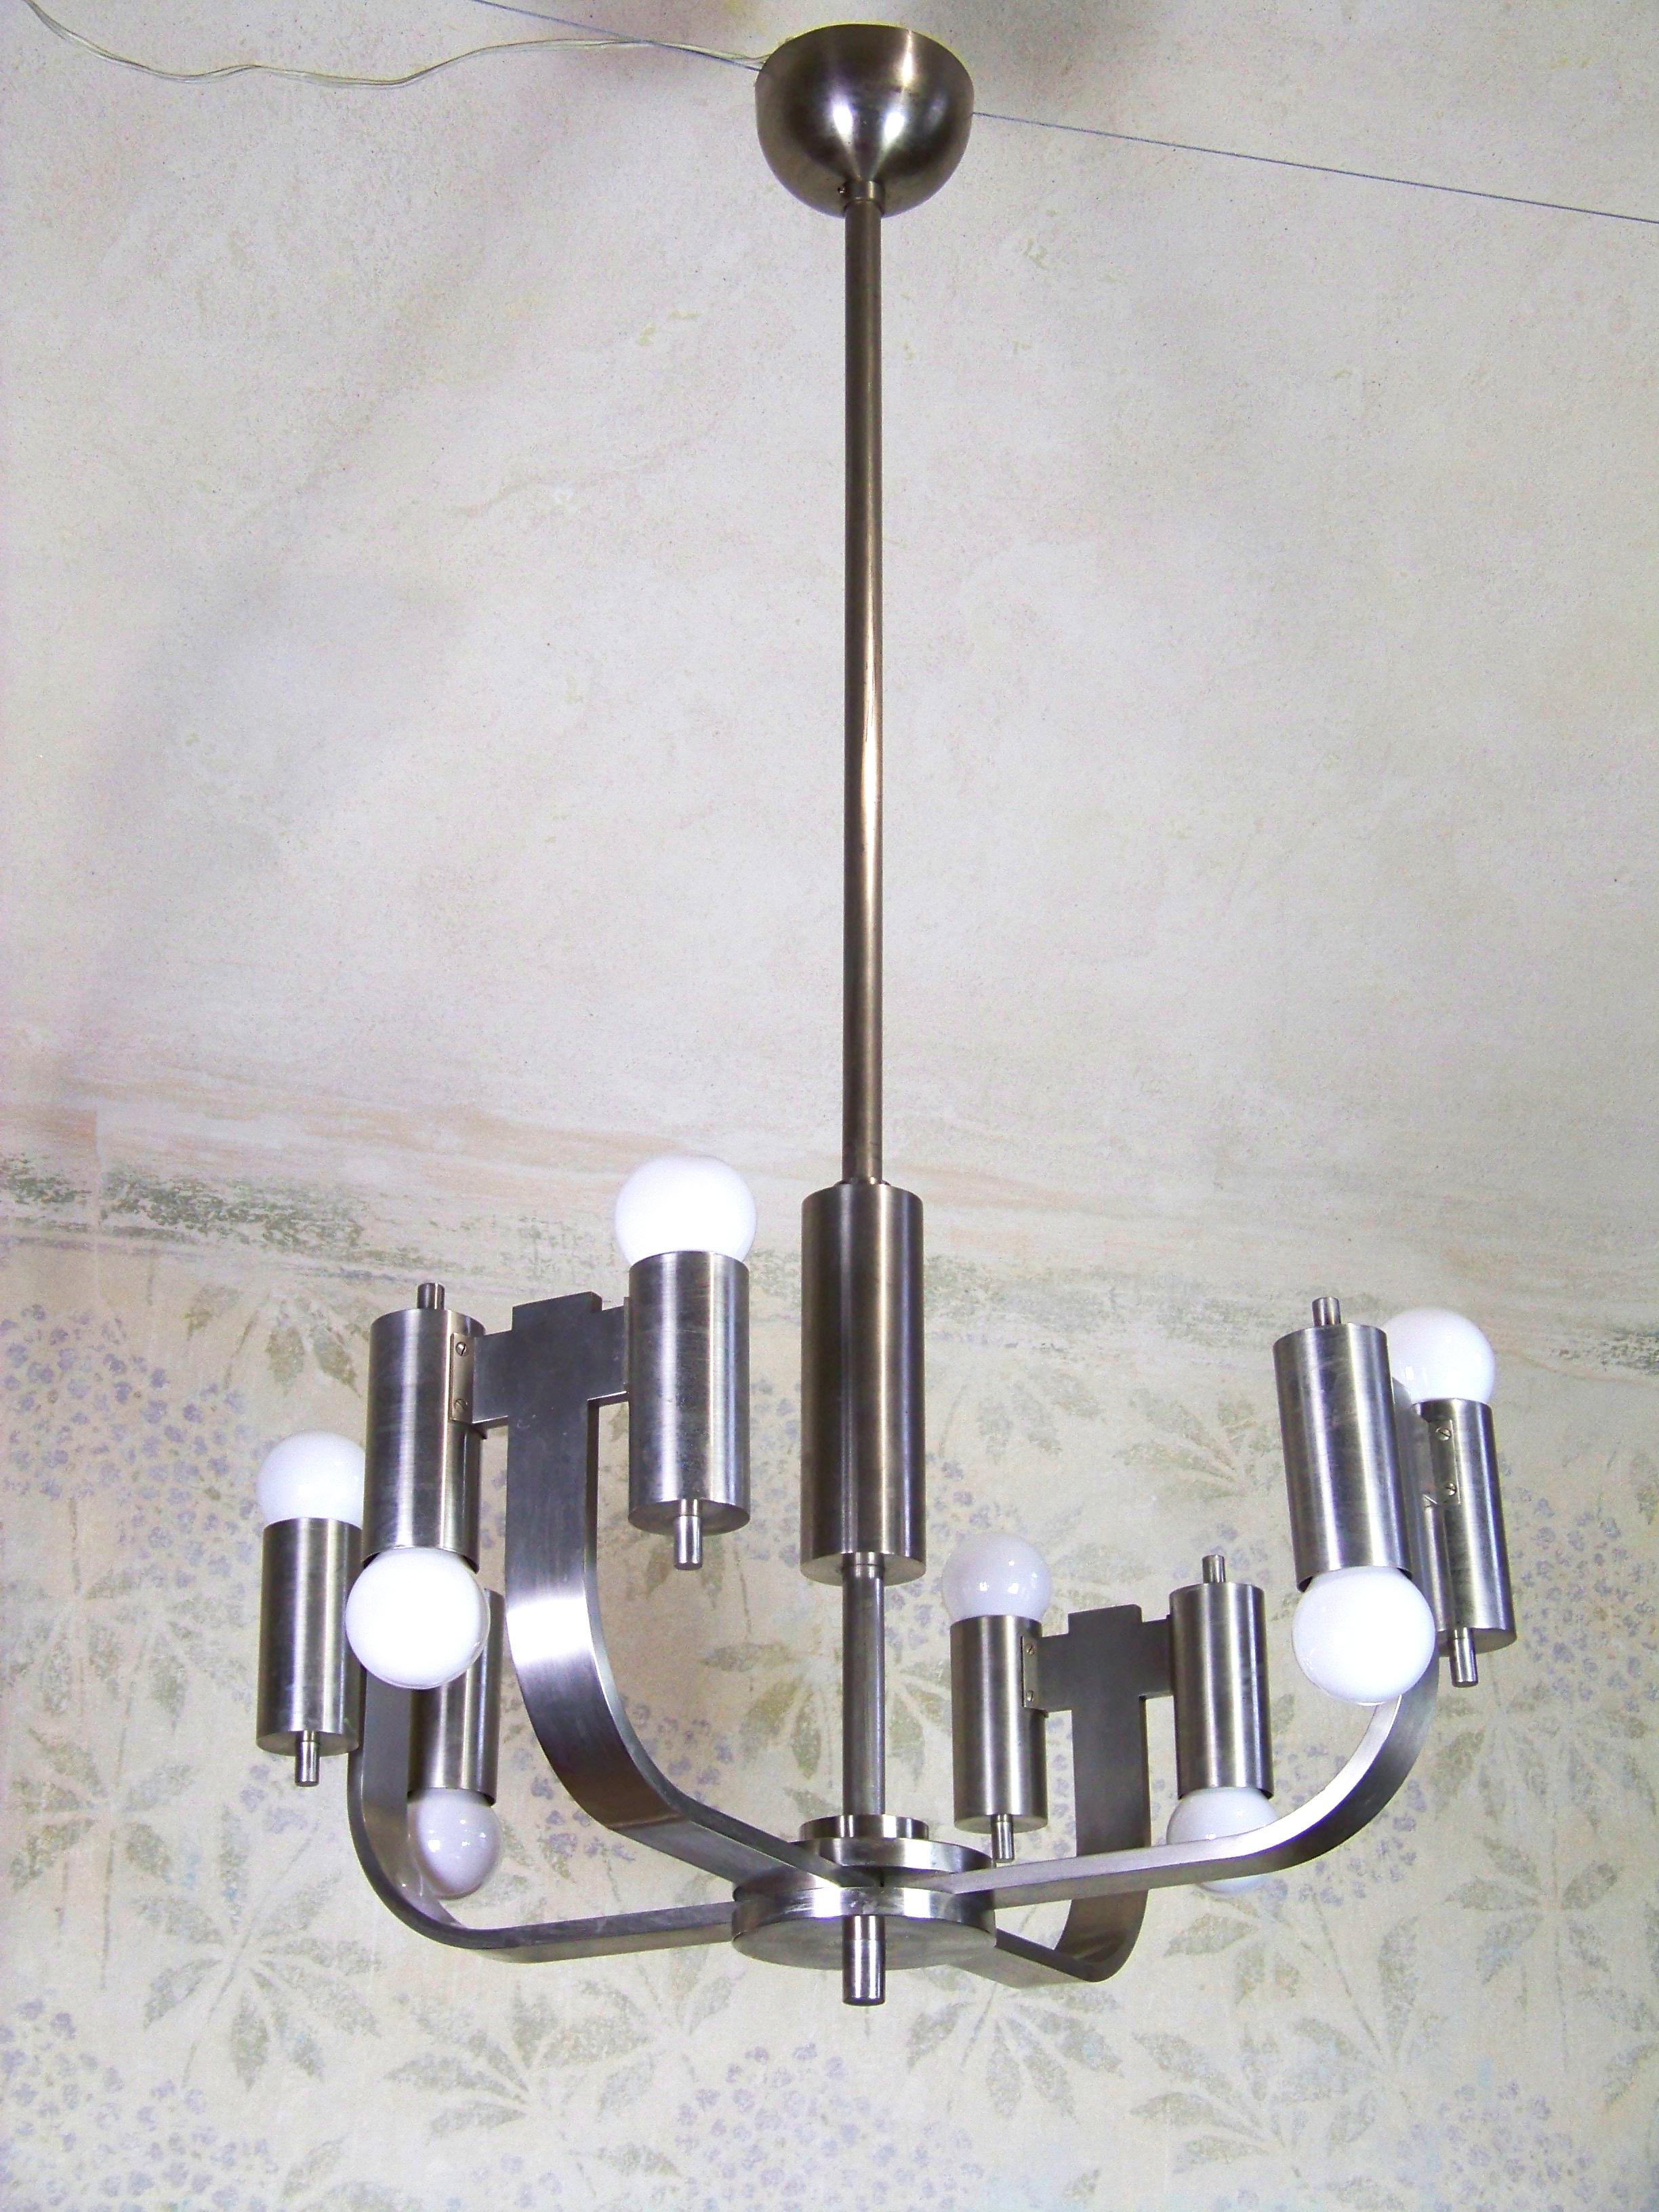 The chandelier is made of brass nickel-plated construction. The chandelier has two circuit that can be used separately (One lower, the other upper).

Fully functional in perfect original condition. New cabling.